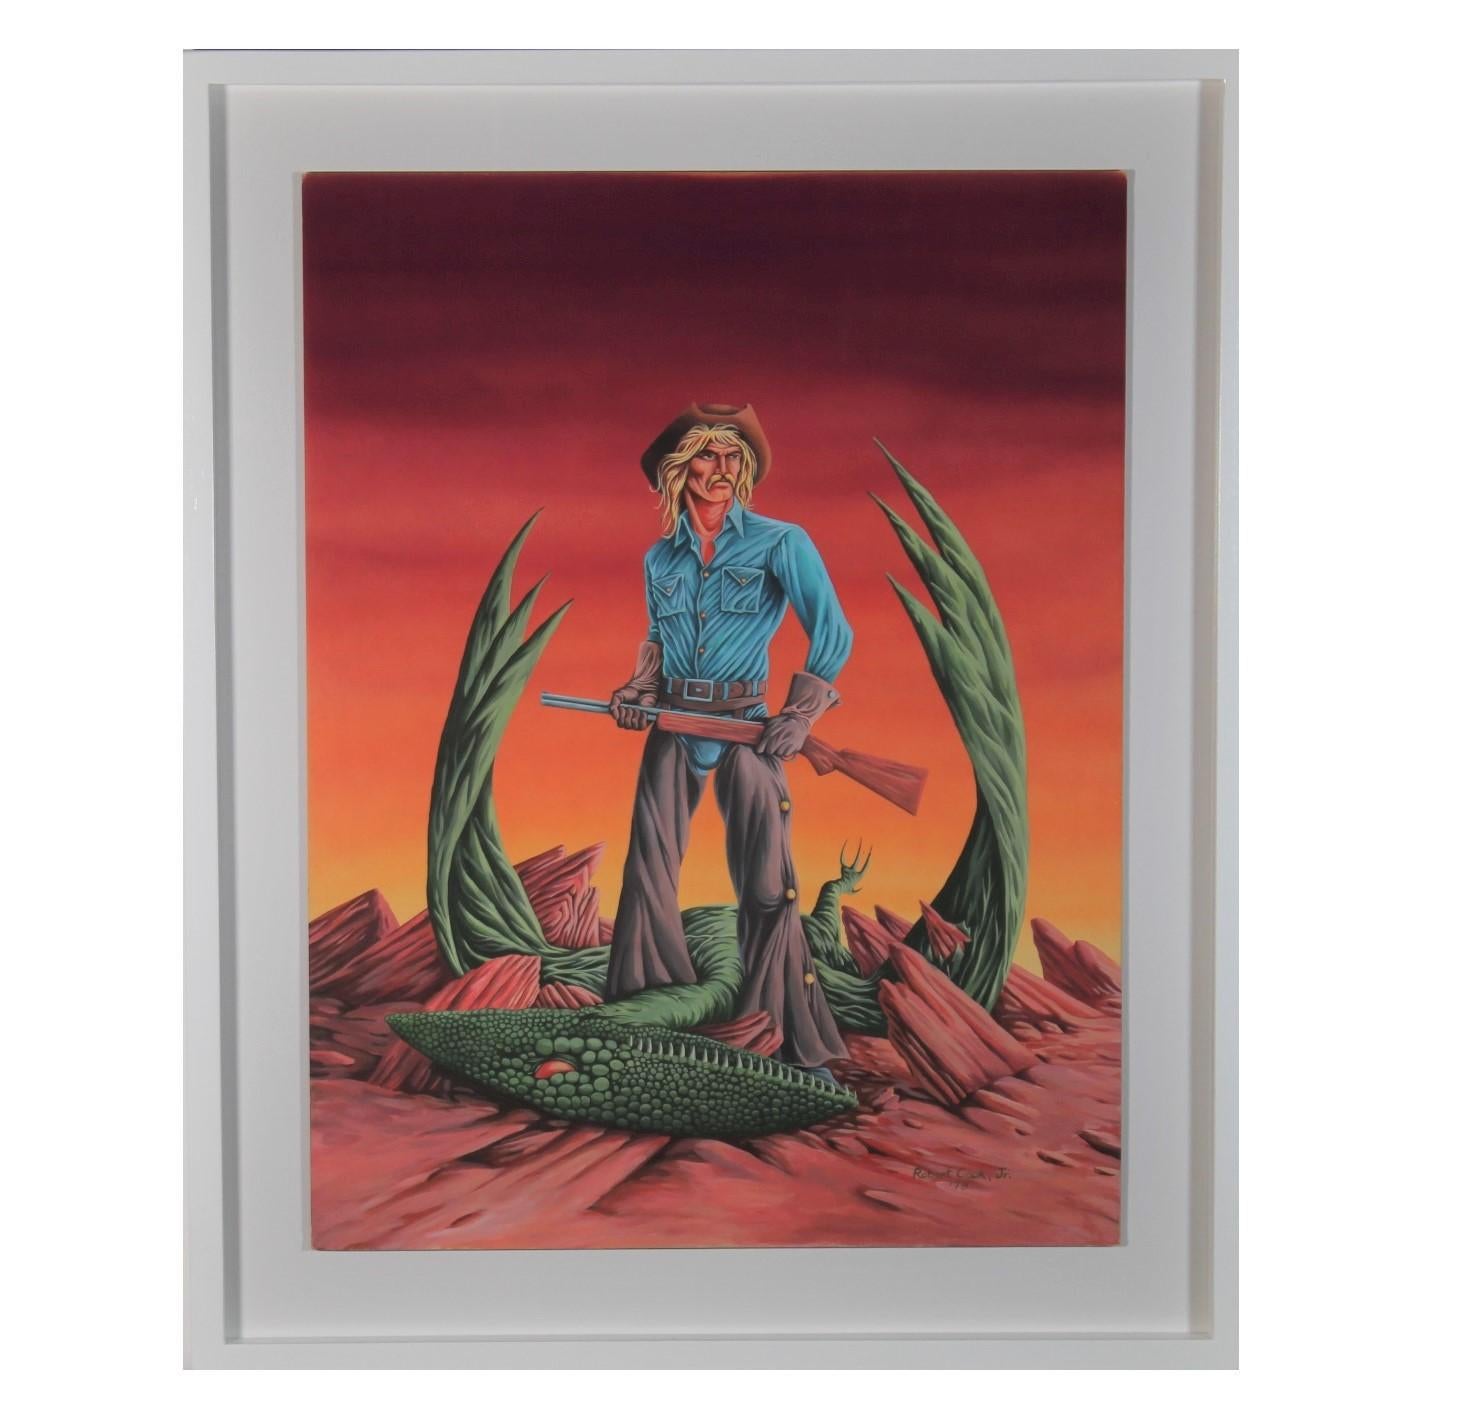 Robert Cook Jr. Figurative Art - Sci-Fi Themed Space Cowboy with Monster